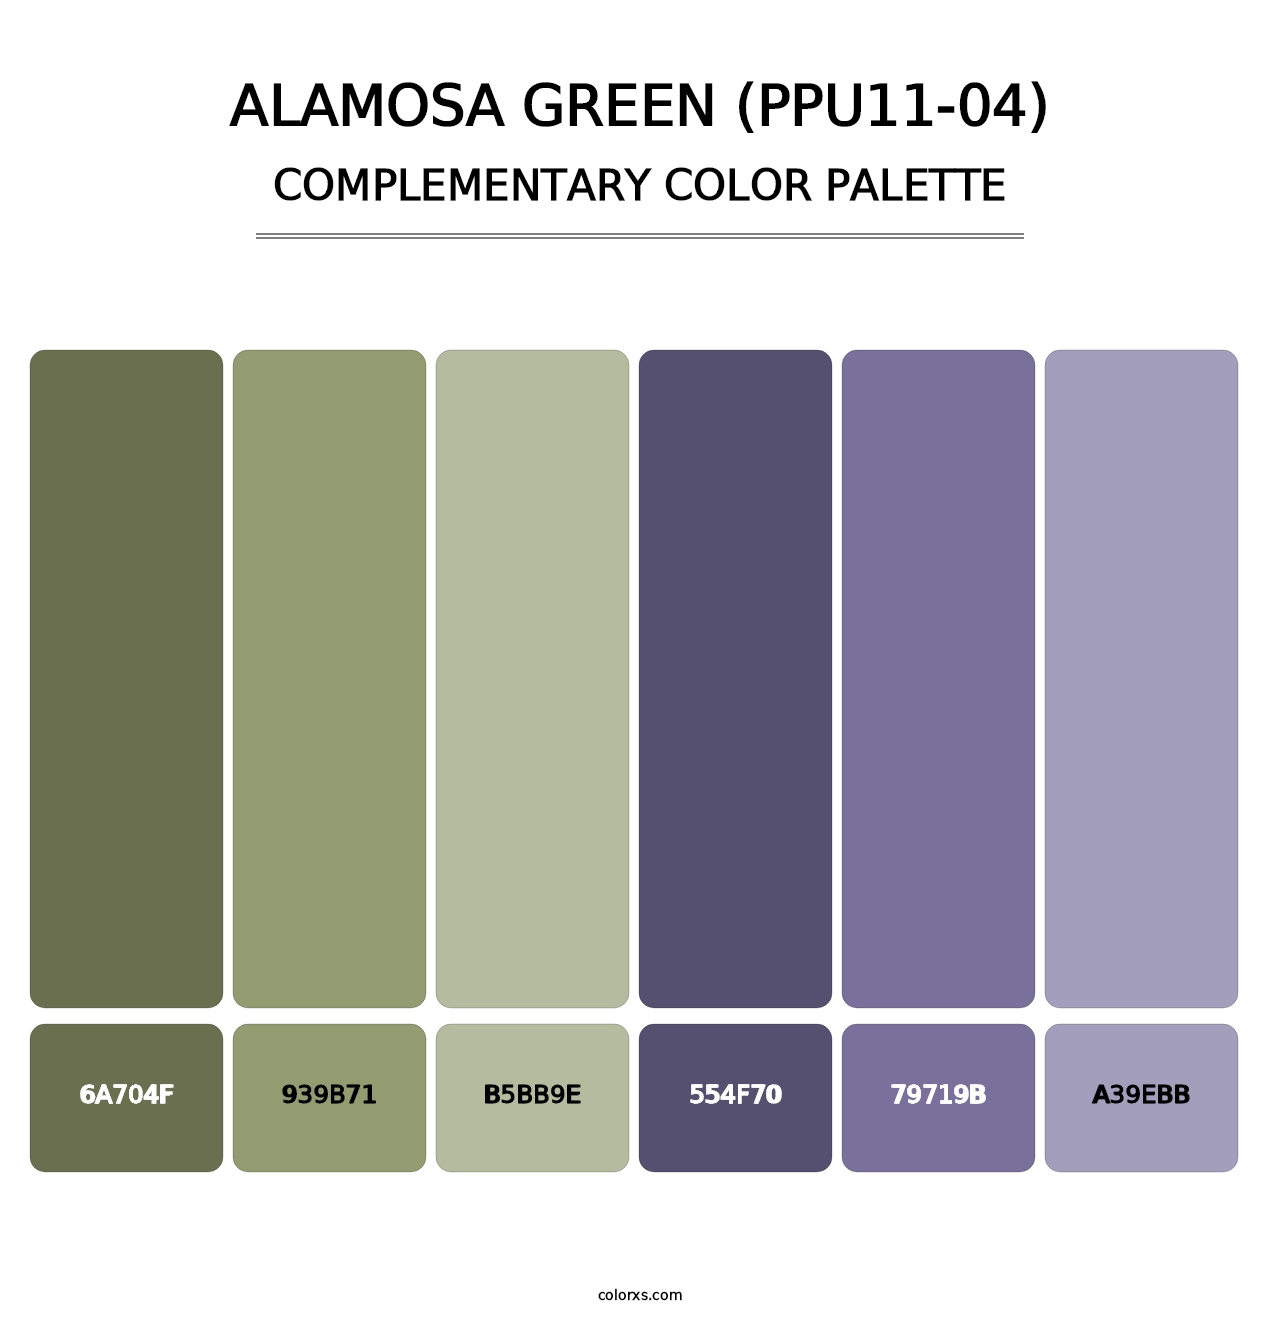 Alamosa Green (PPU11-04) - Complementary Color Palette